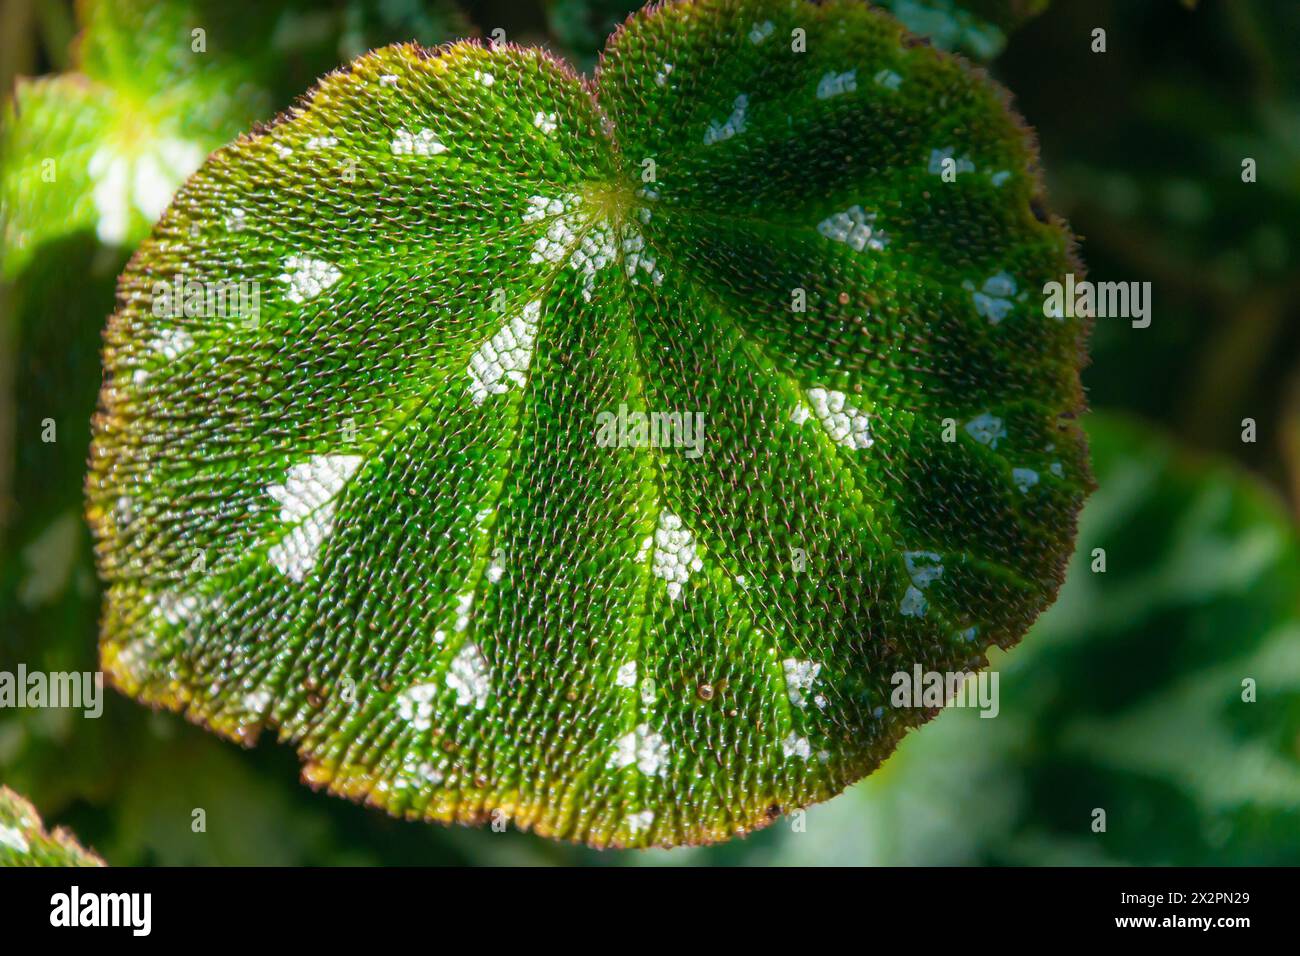 Beautiful green leaves with a pattern, close-up. Begonia imperialis, the imperial begonia. Natural plant background. Stock Photo